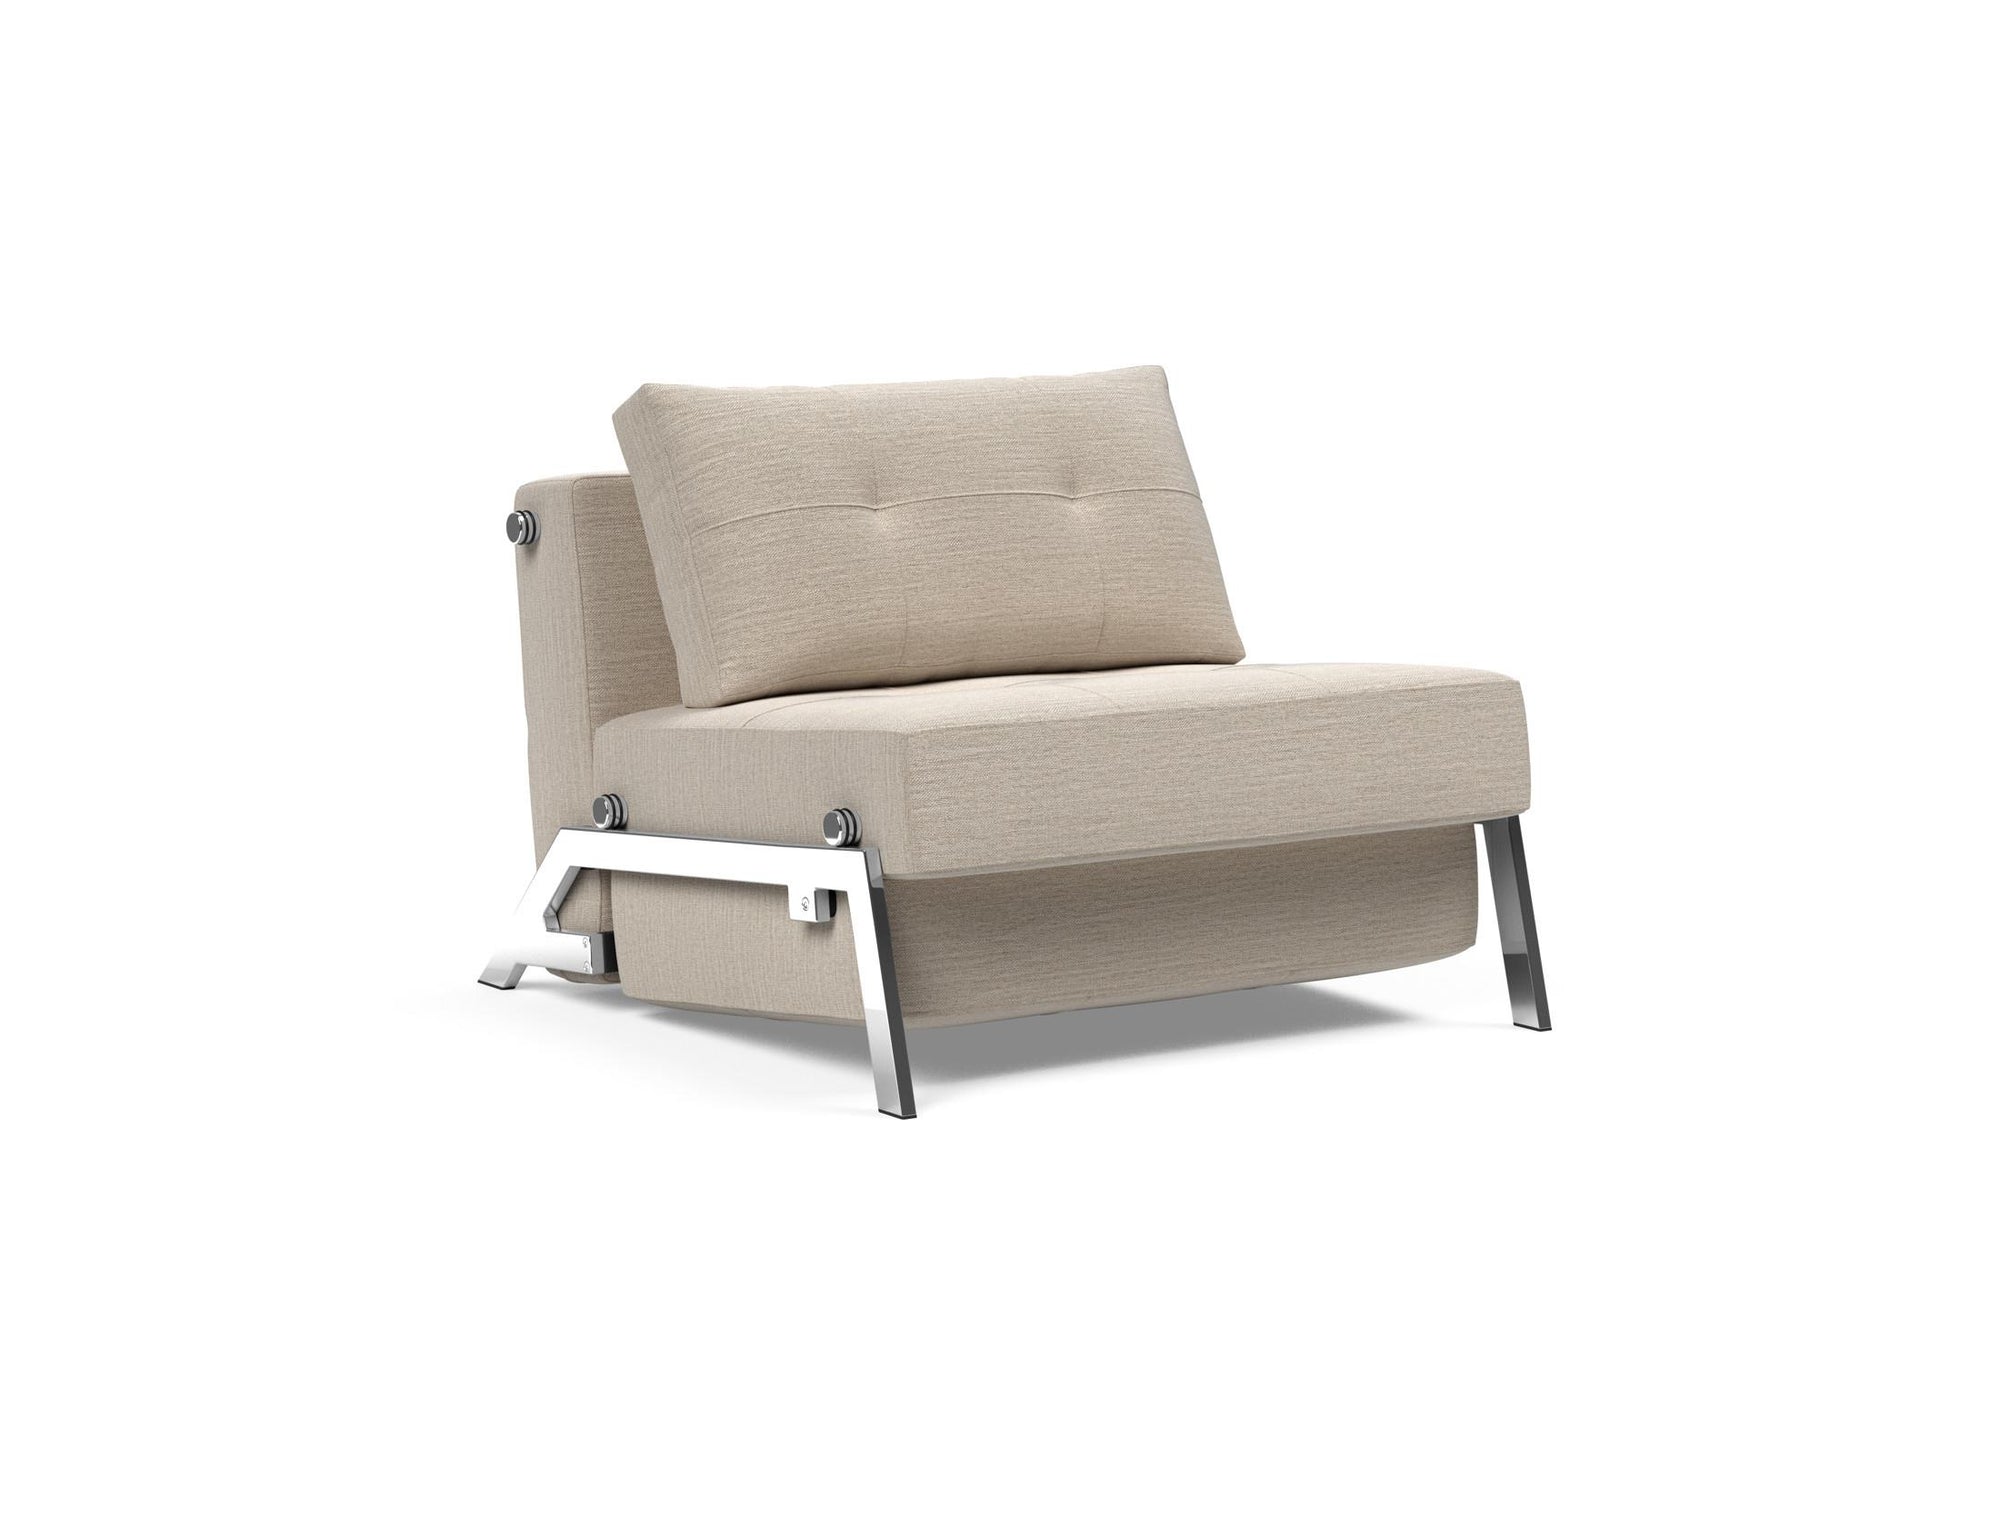 CUBED Chrome Sofabed 90CM